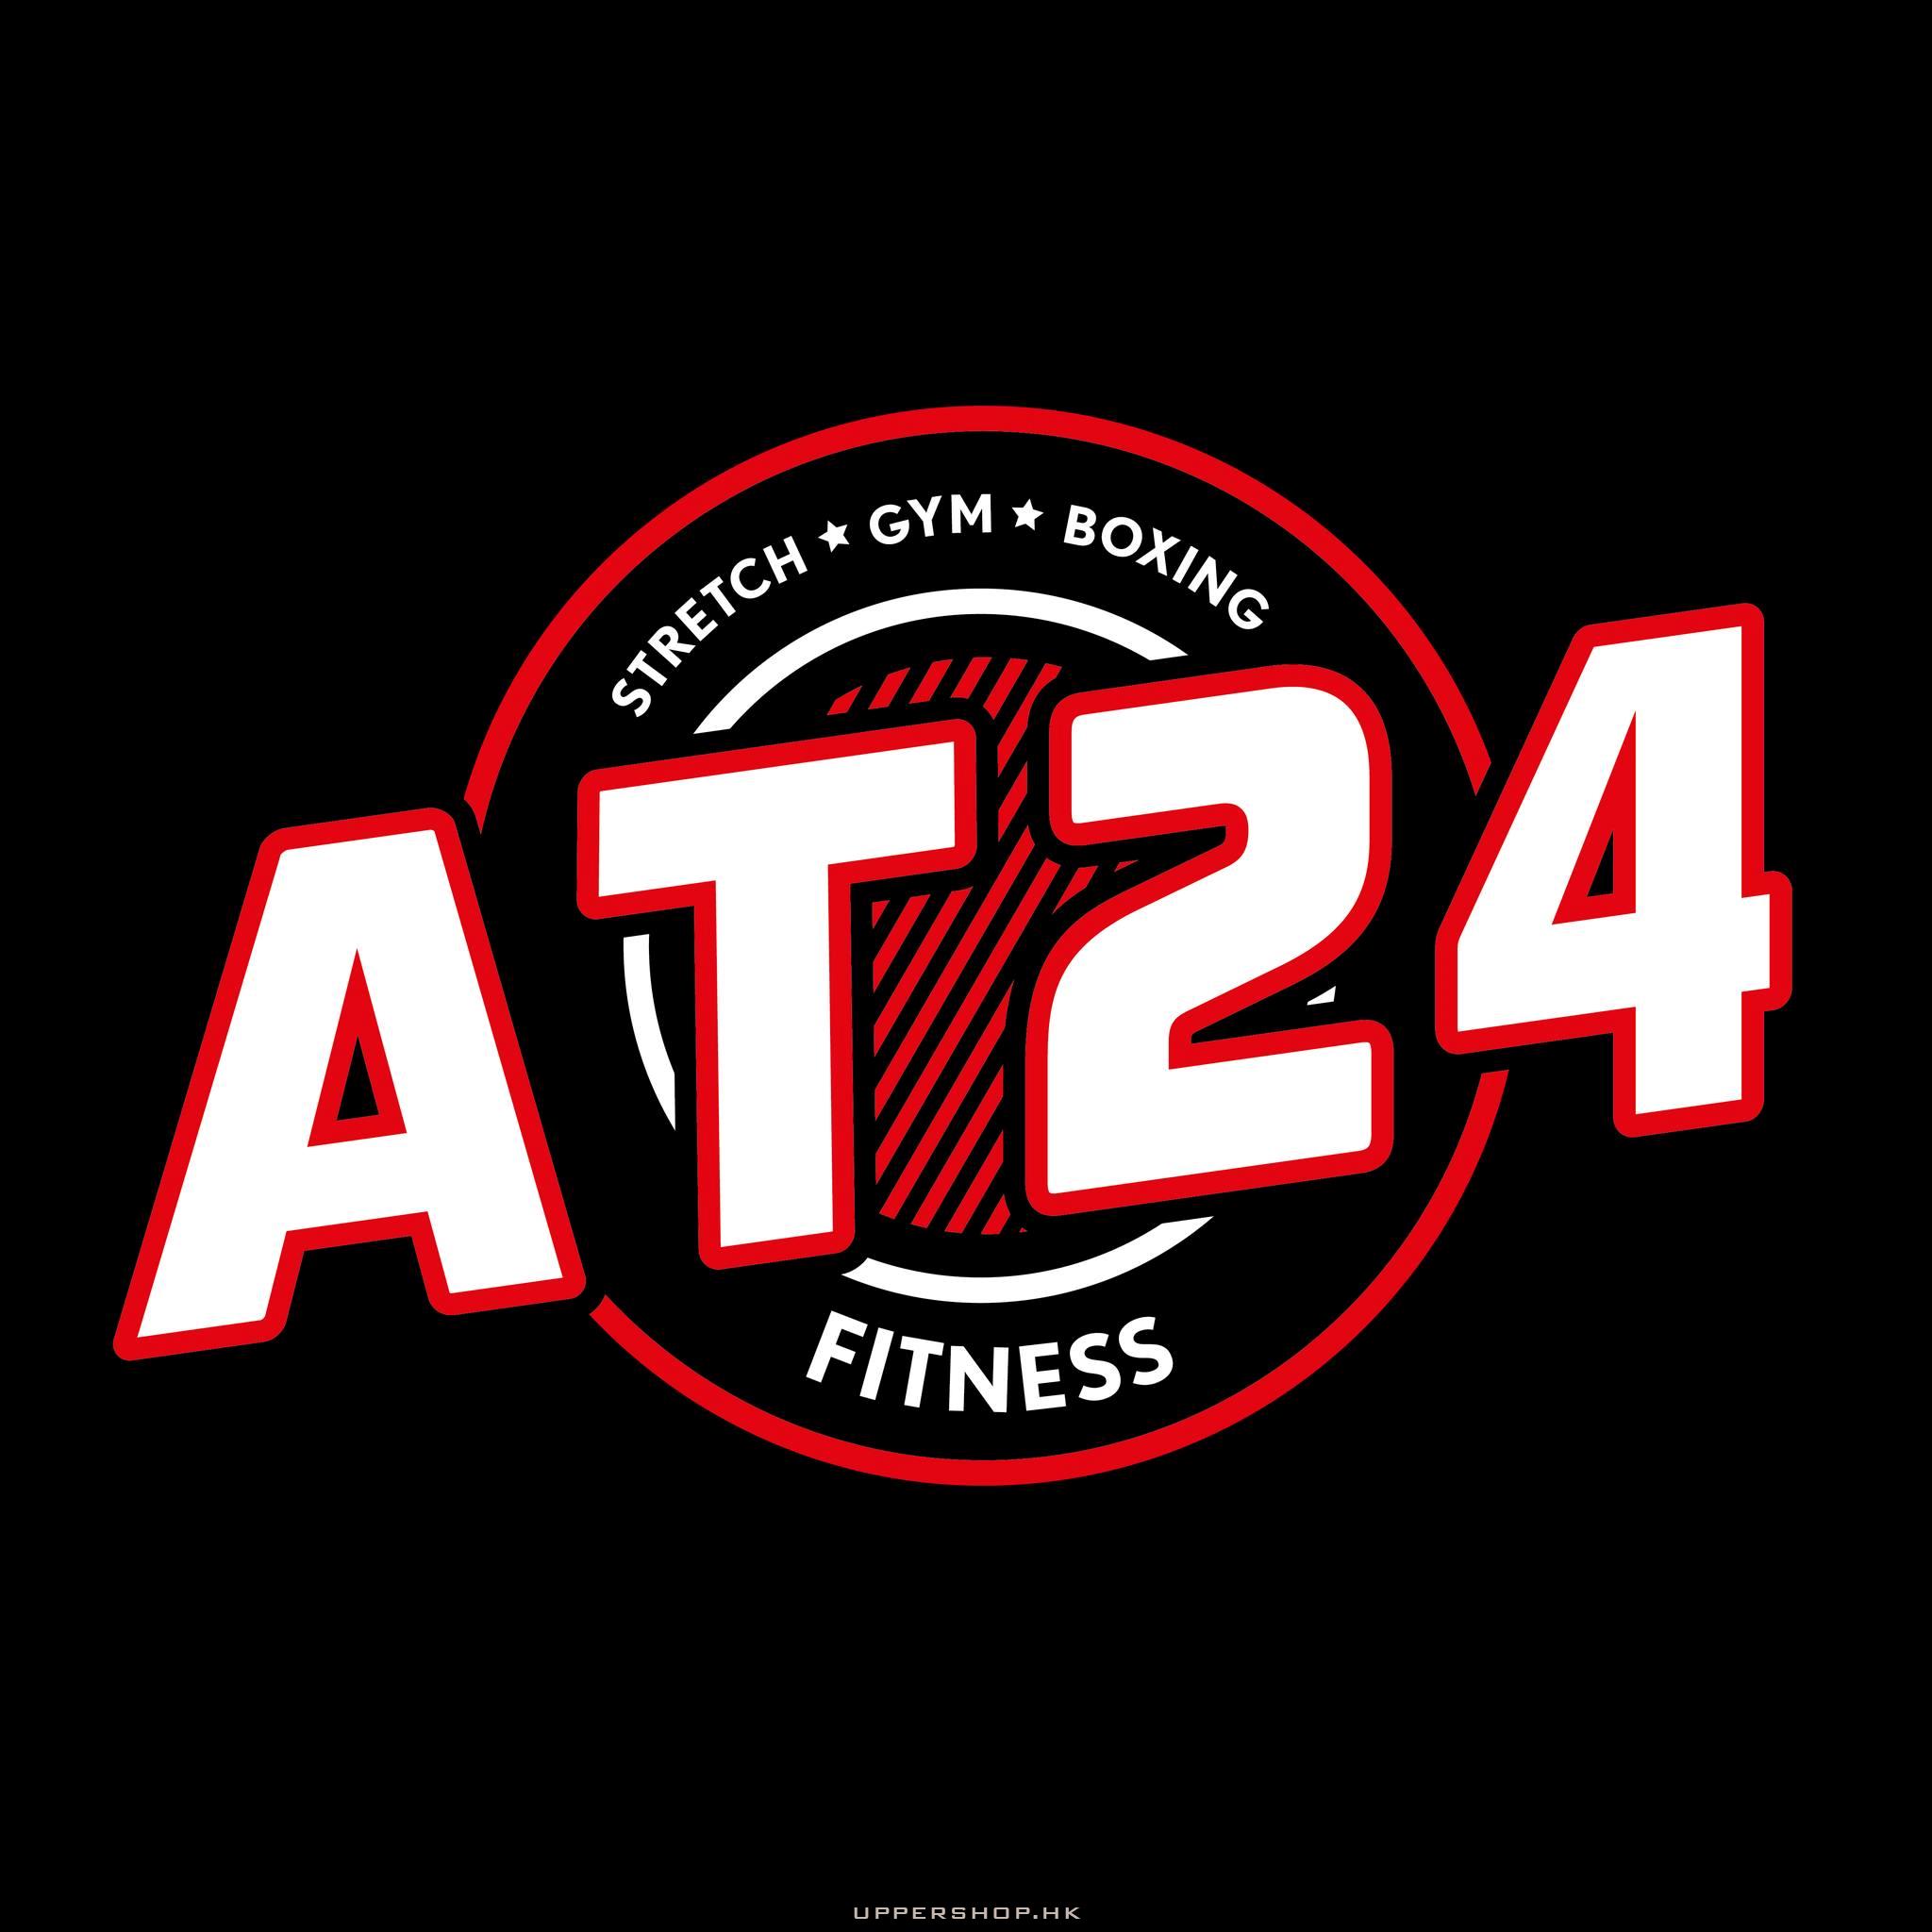 AT24 Fitness